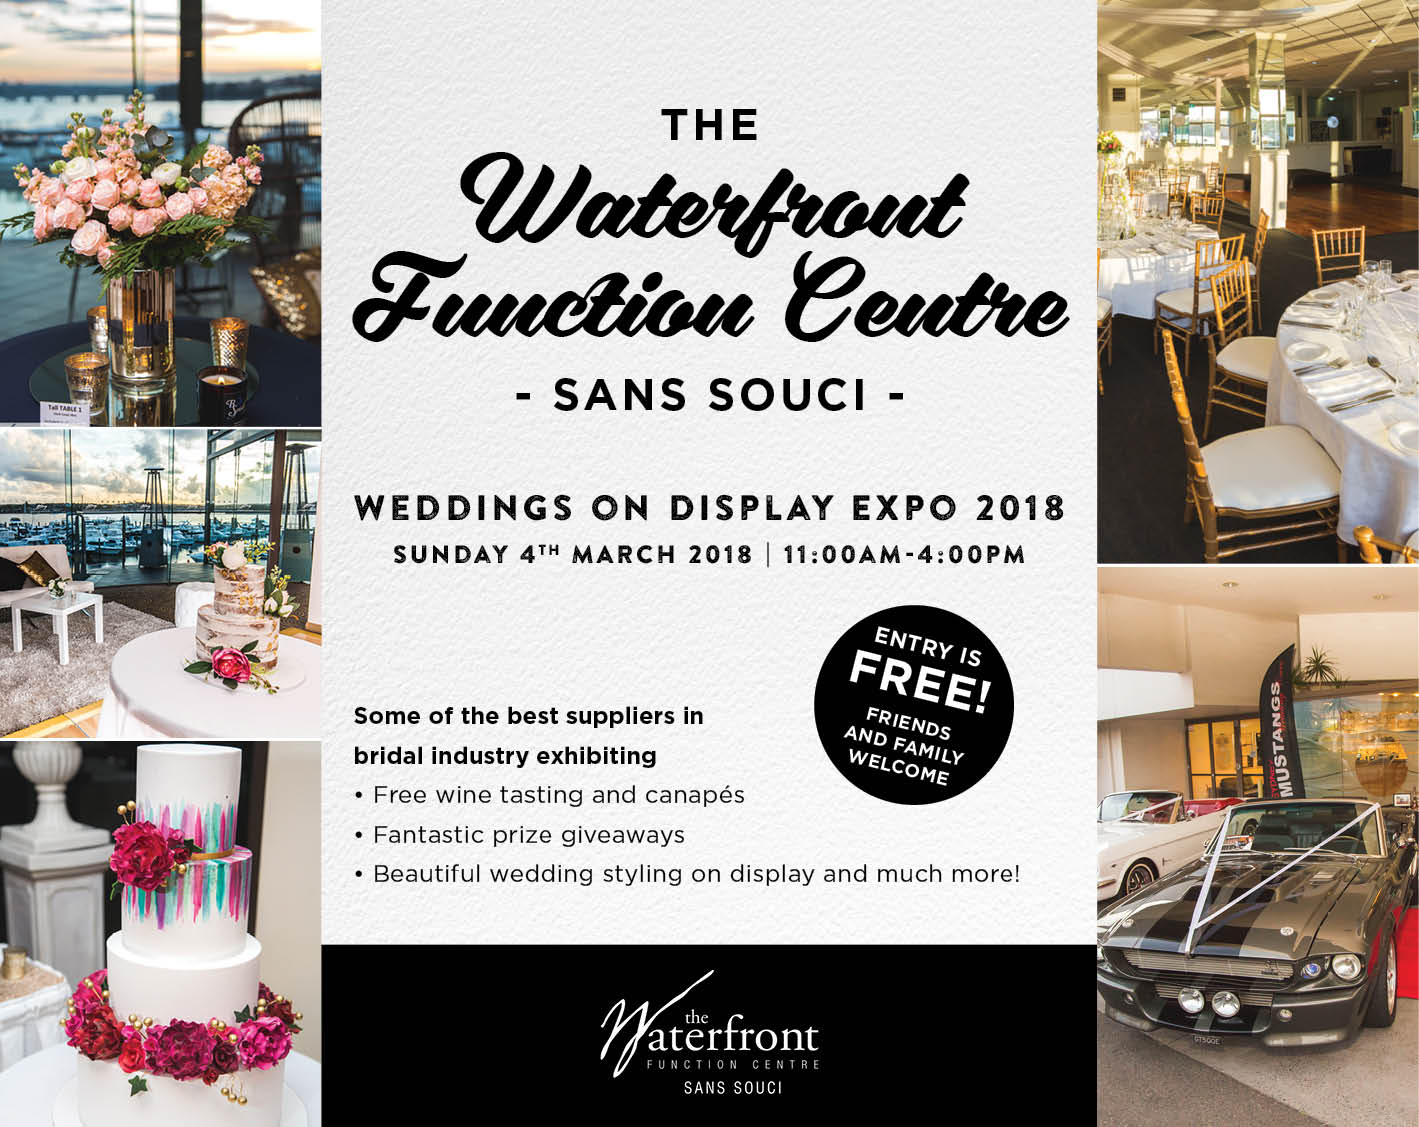 Weddings on Display Waterfront Function Centre 2018